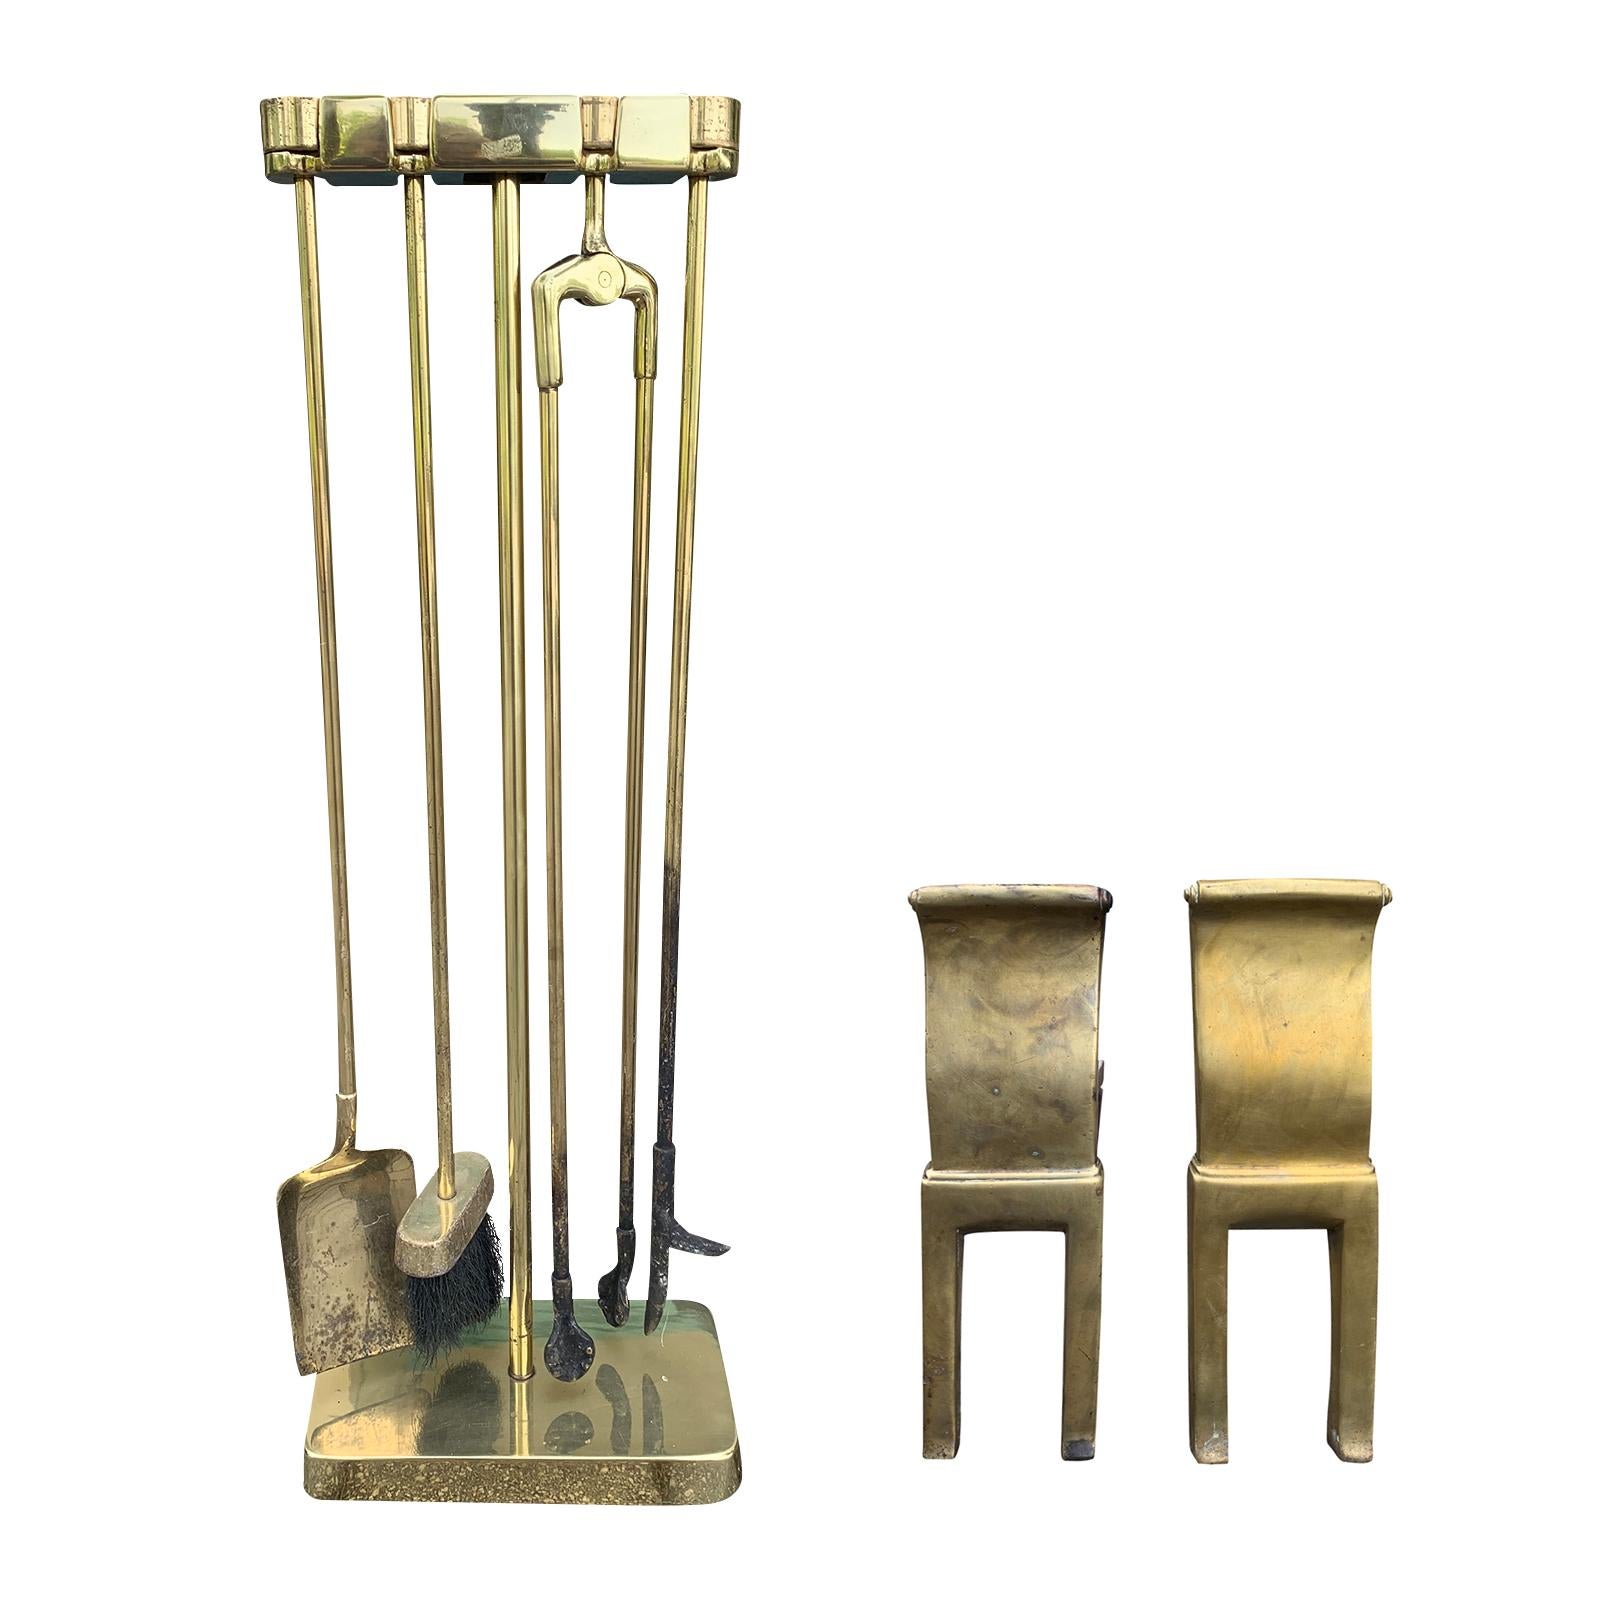 Mid-20th Century Brass Andirons & Fire Tools Set with Stand, Hallmarked